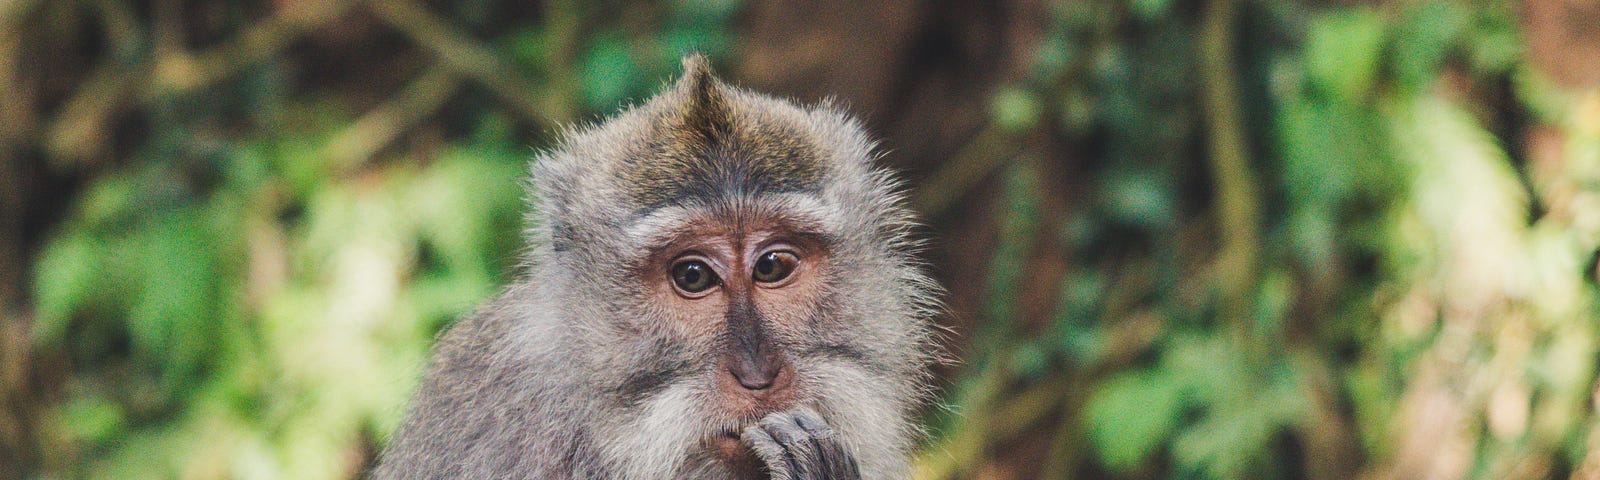 Here is a photo of a contemplative monkey in deep thought. An adorable picture indeed!